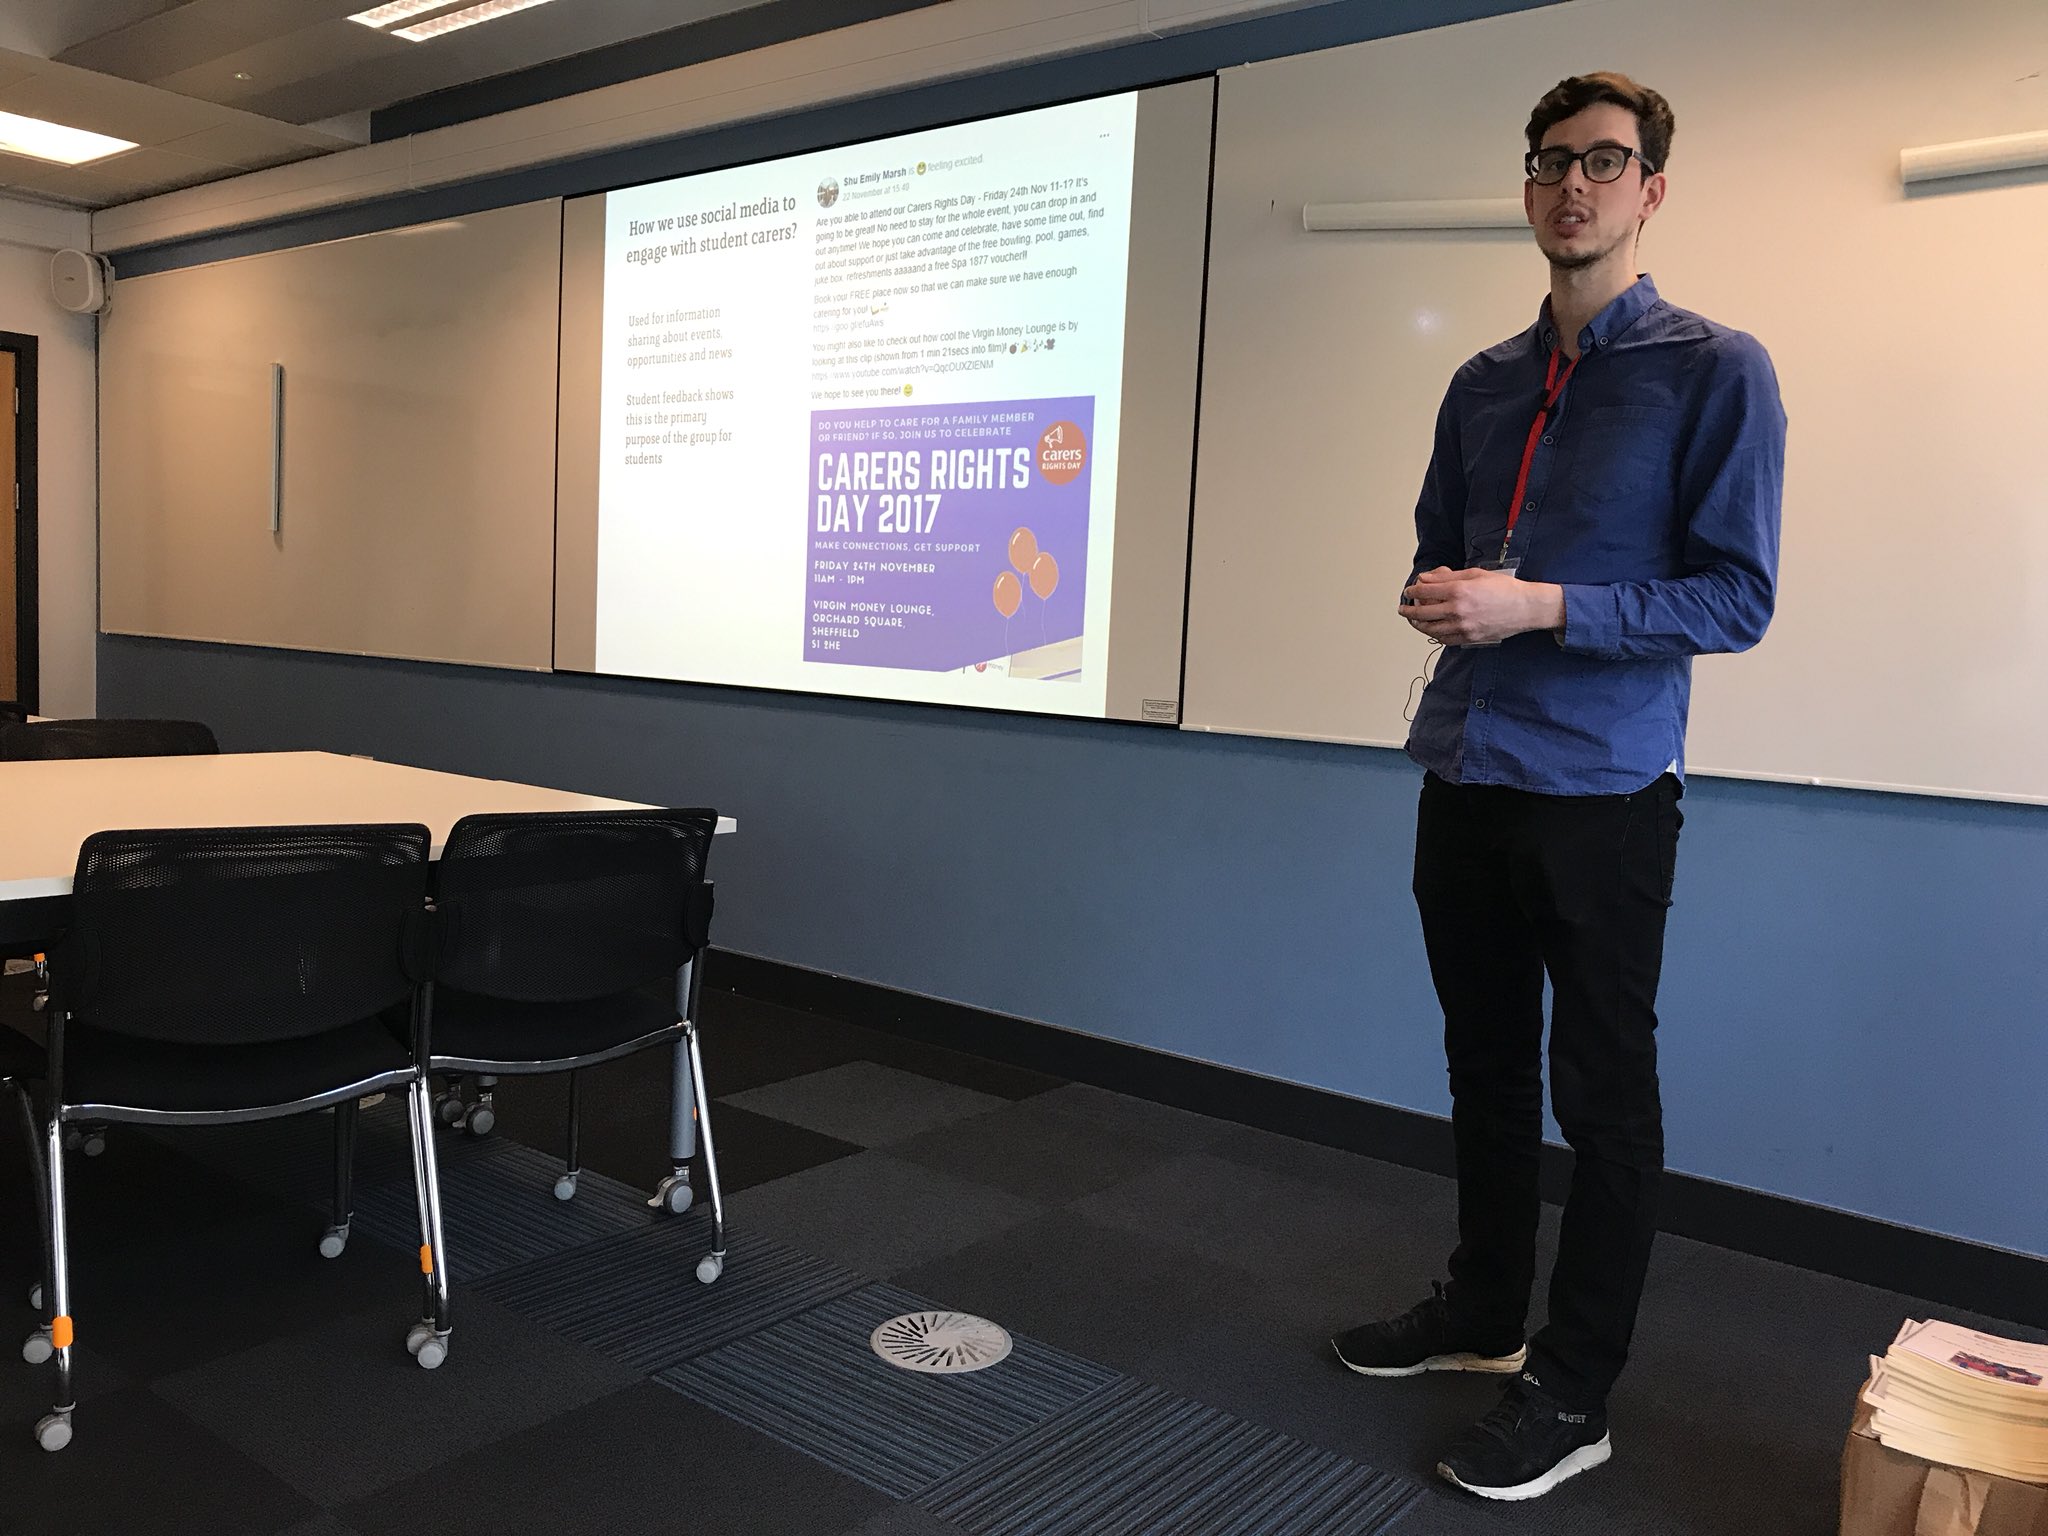 James Giddings @giddingstweets talks about using social media to support students with caring responsibilities #SocMedHE17 https://t.co/fzVycKwI3Z